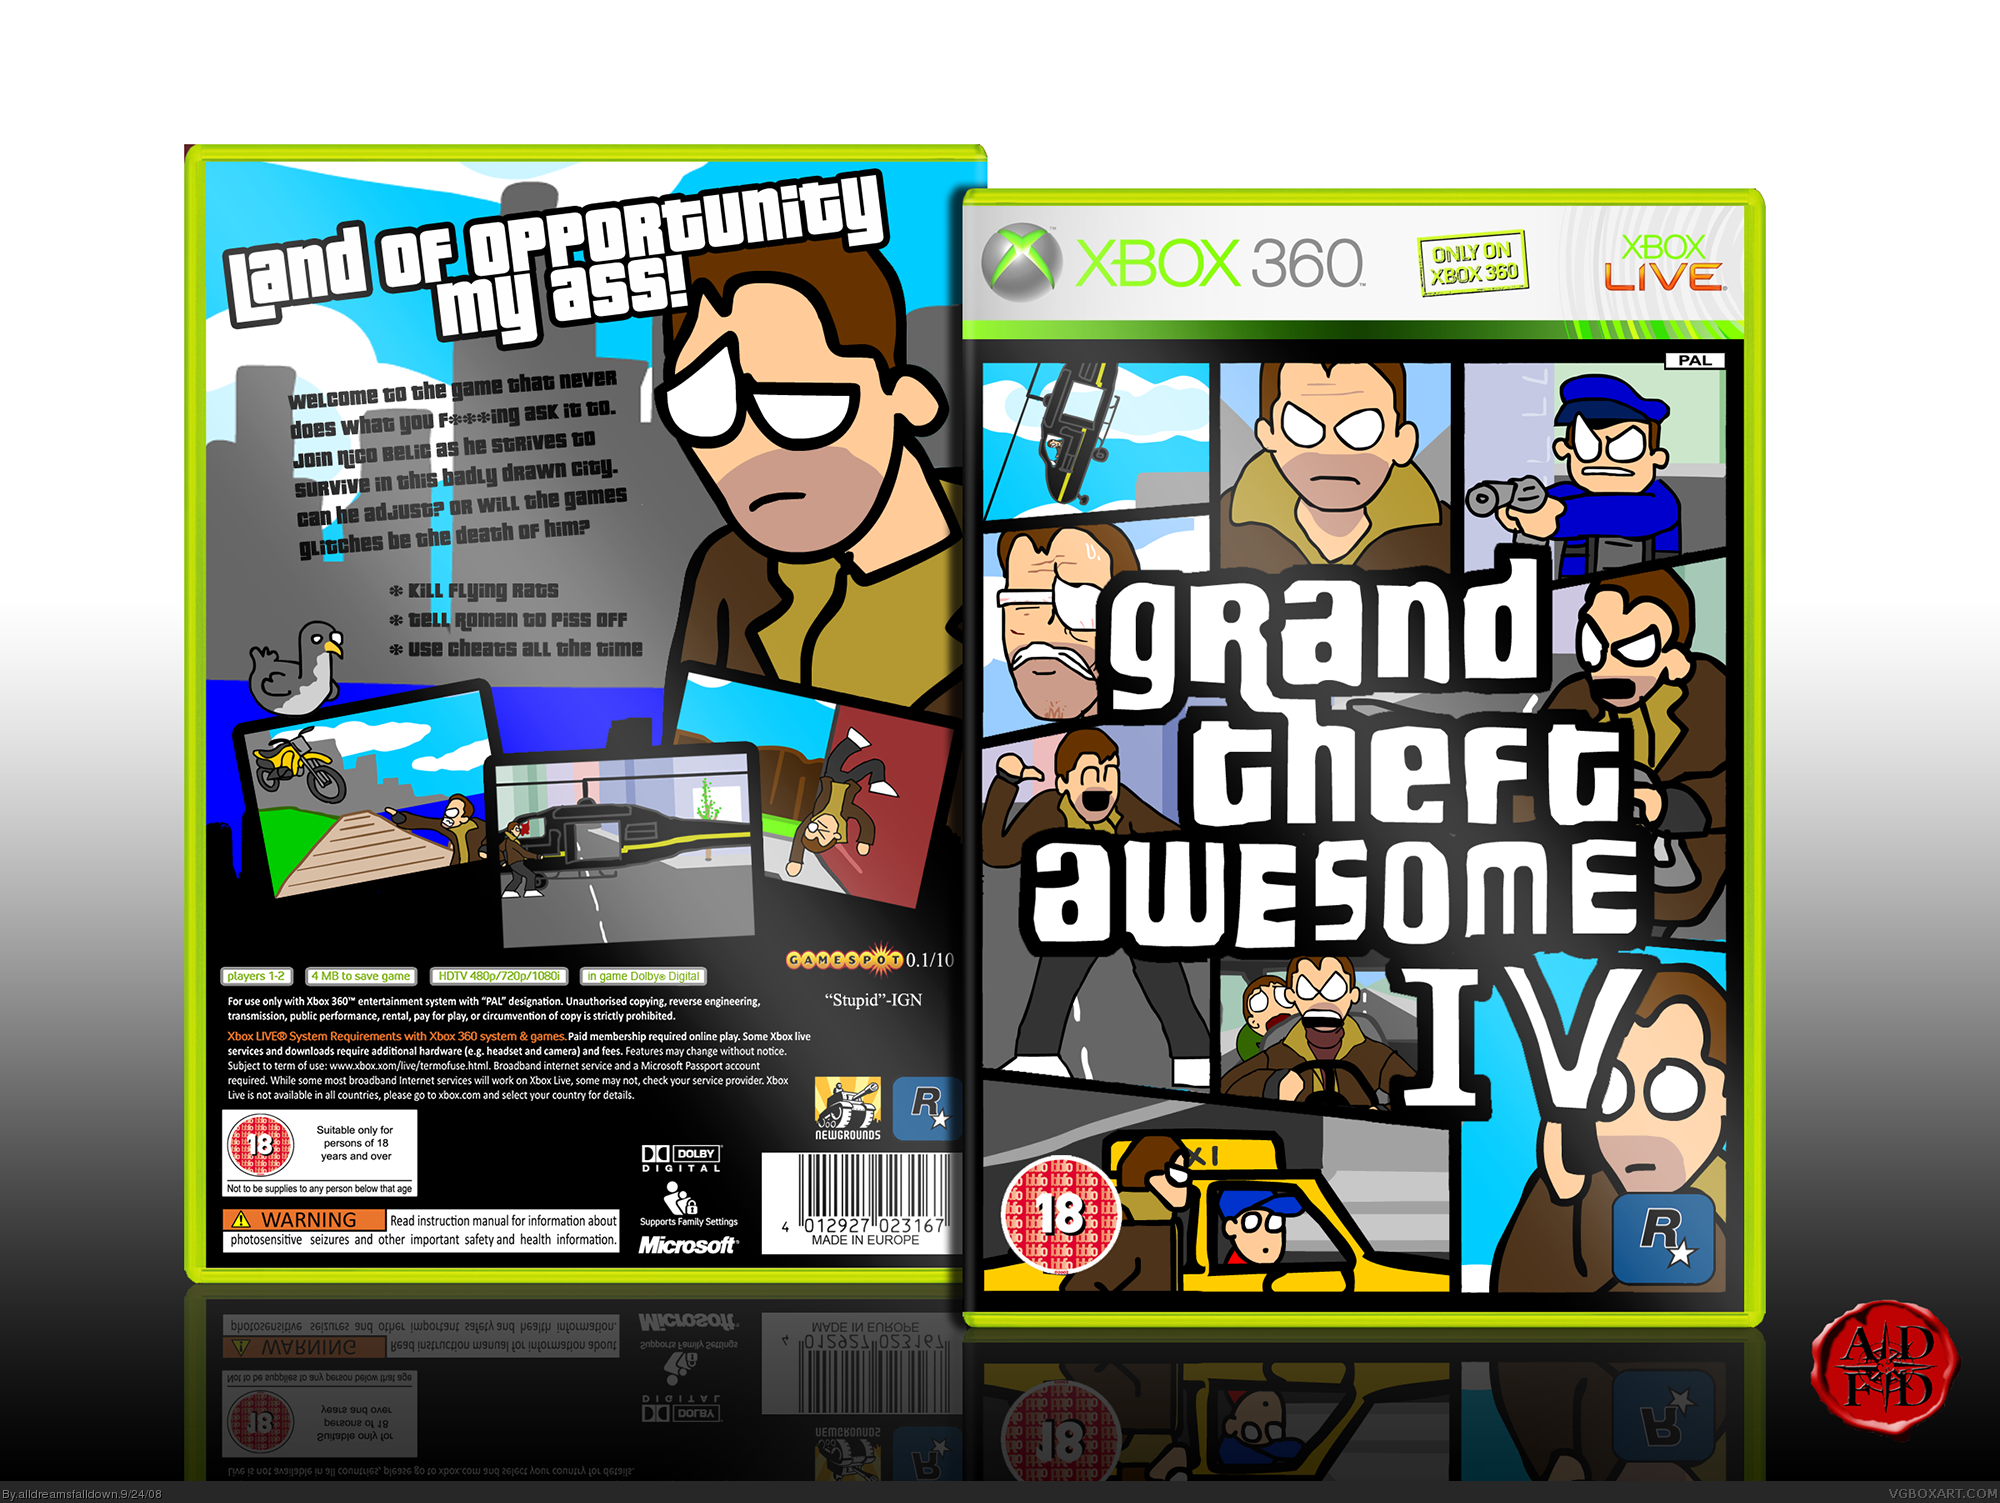 Grand Theft Awesome IV box cover